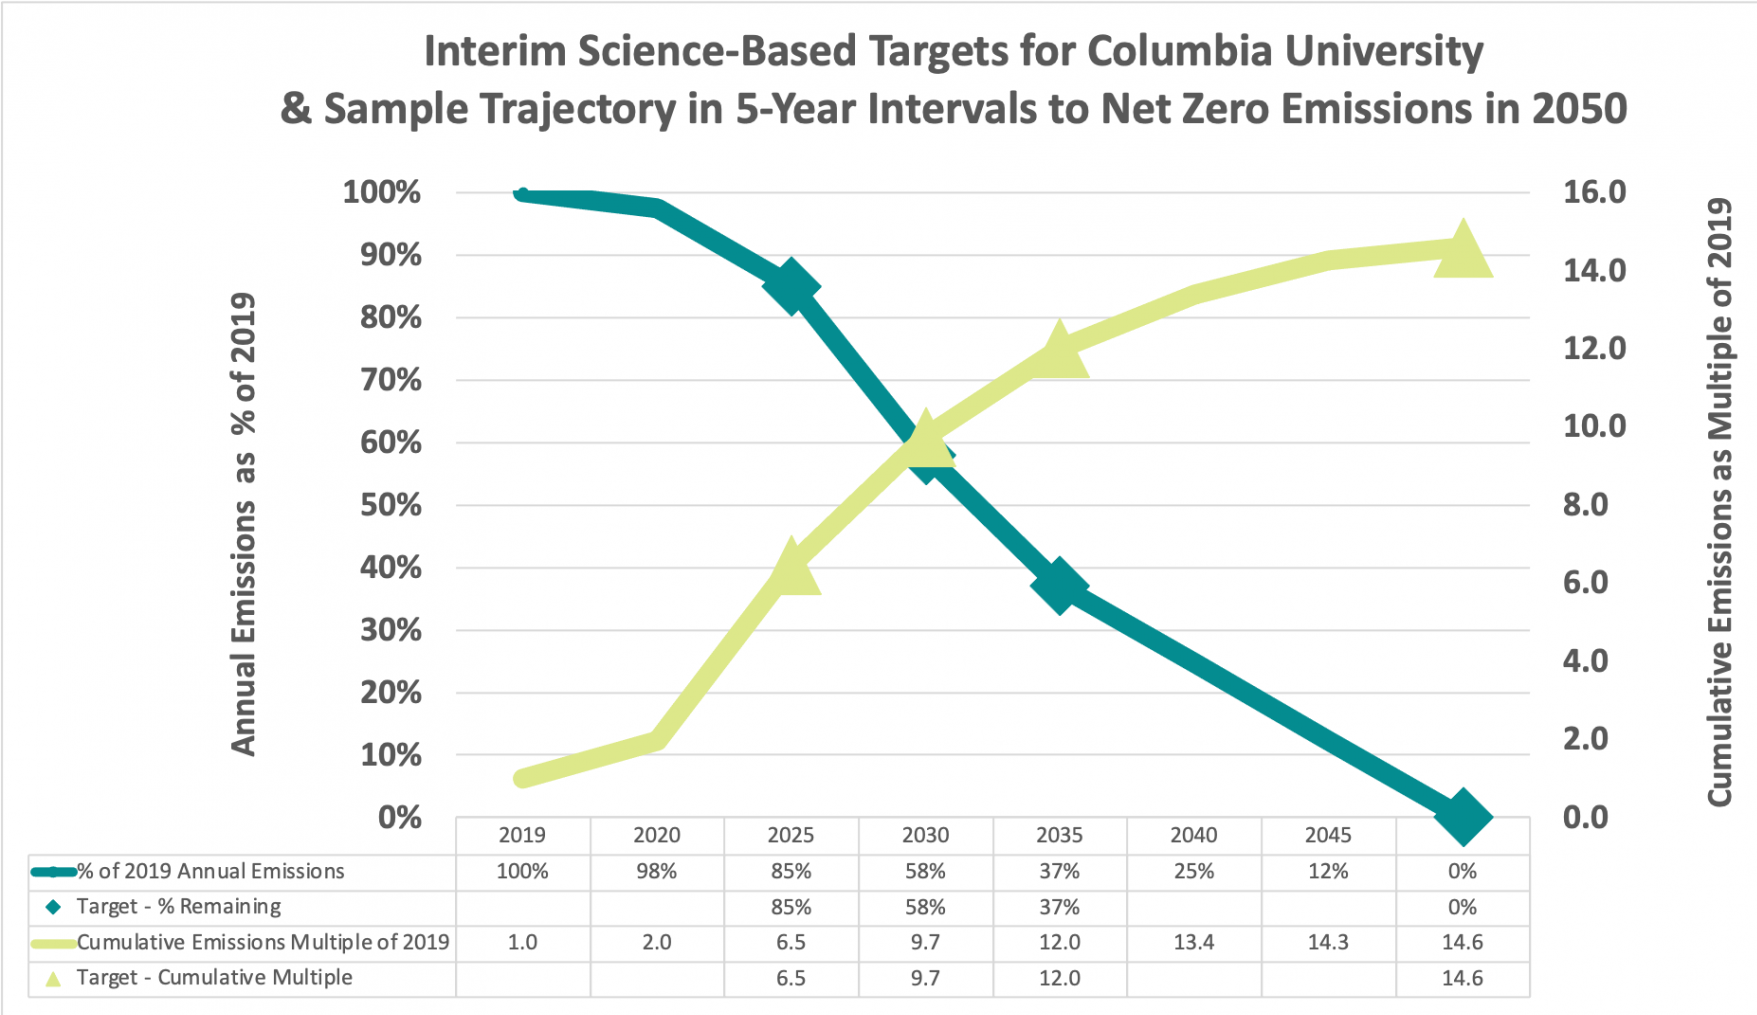 Image Description: Interim Science-Based Targets for Columbia University & Sample Trajectory at 5 Year Intervals to Net Zero in 2050